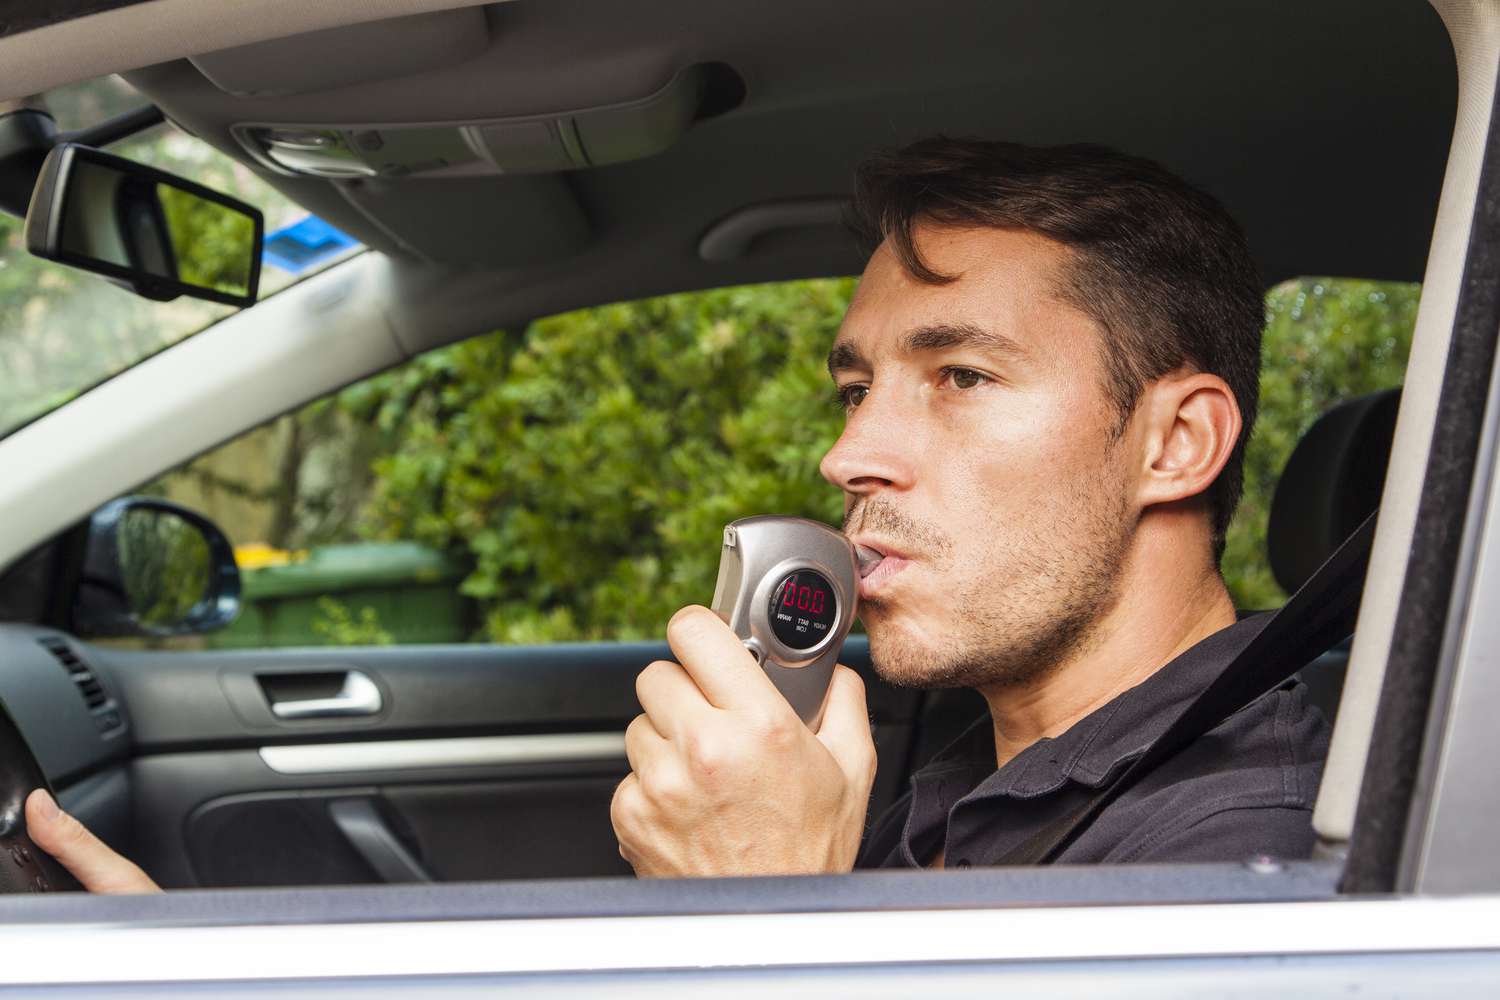 Breathalyzers And Drug Test Kits In DUI Prevention - Designed To Track Drunk Drivers